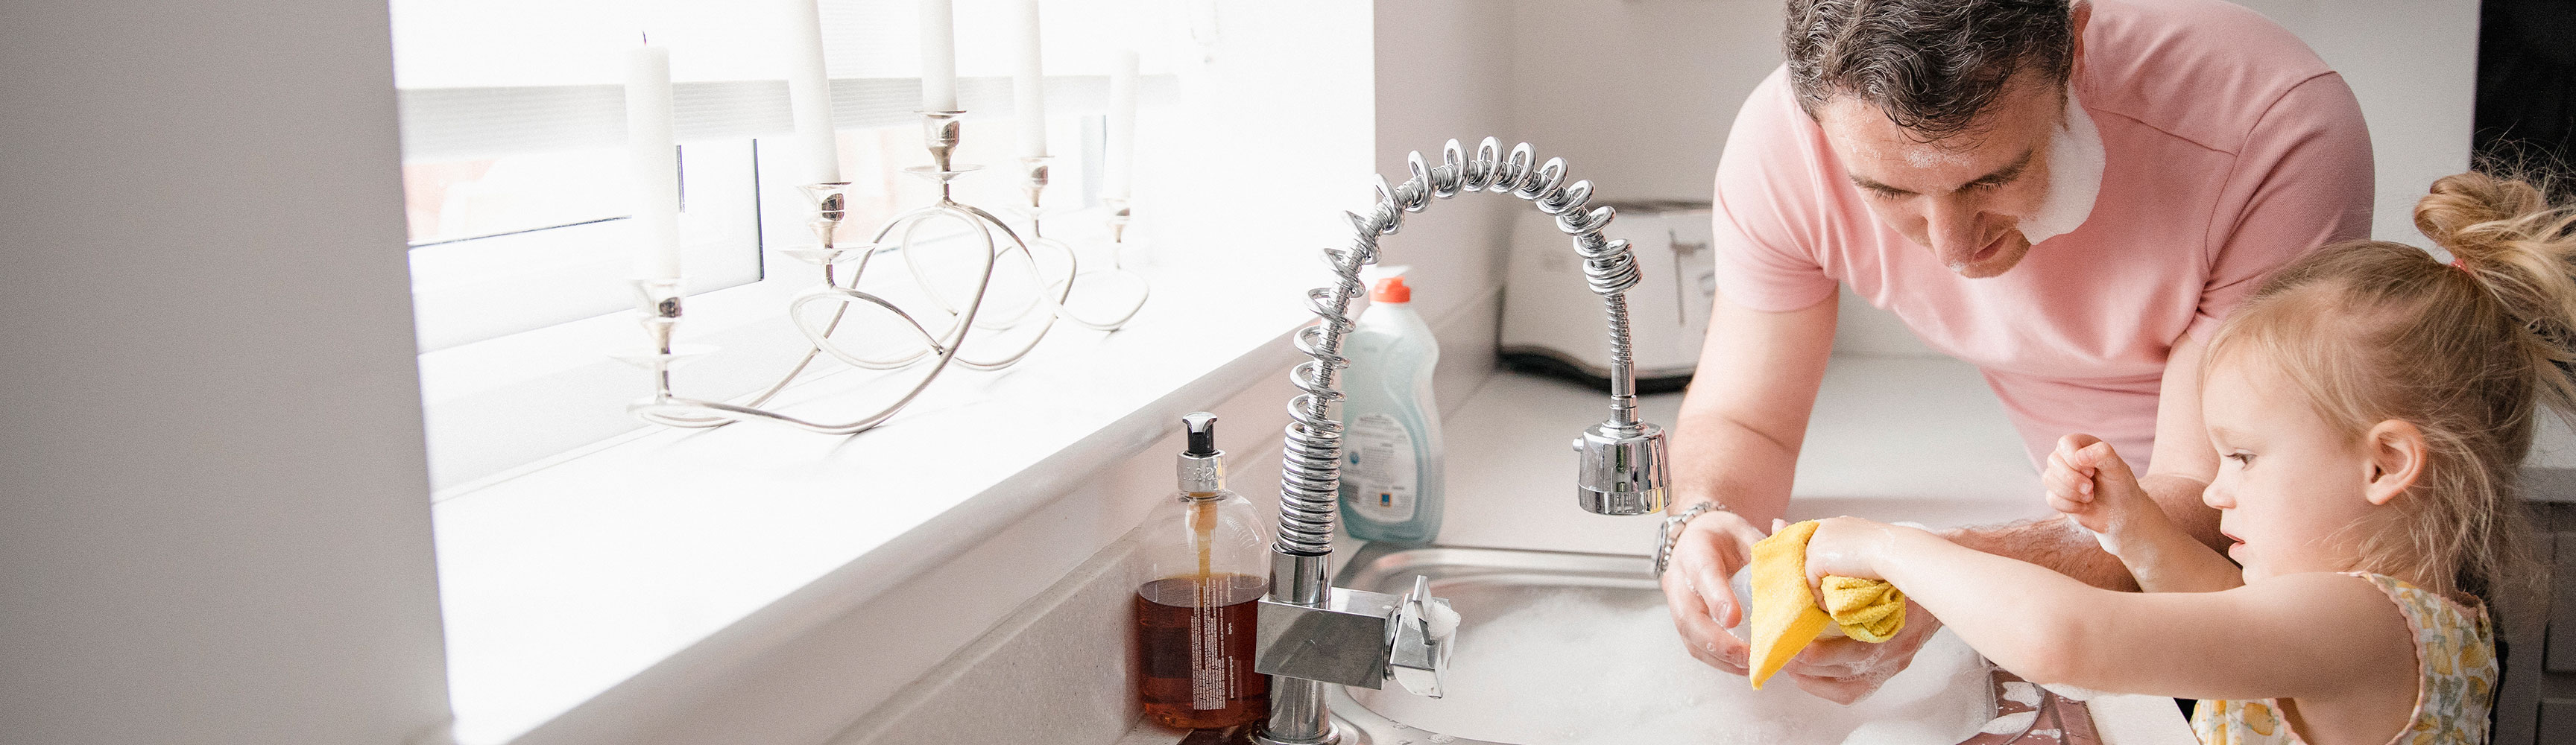 Know the types of water shut-off devices - The Cincinnati Insurance  Companies blog